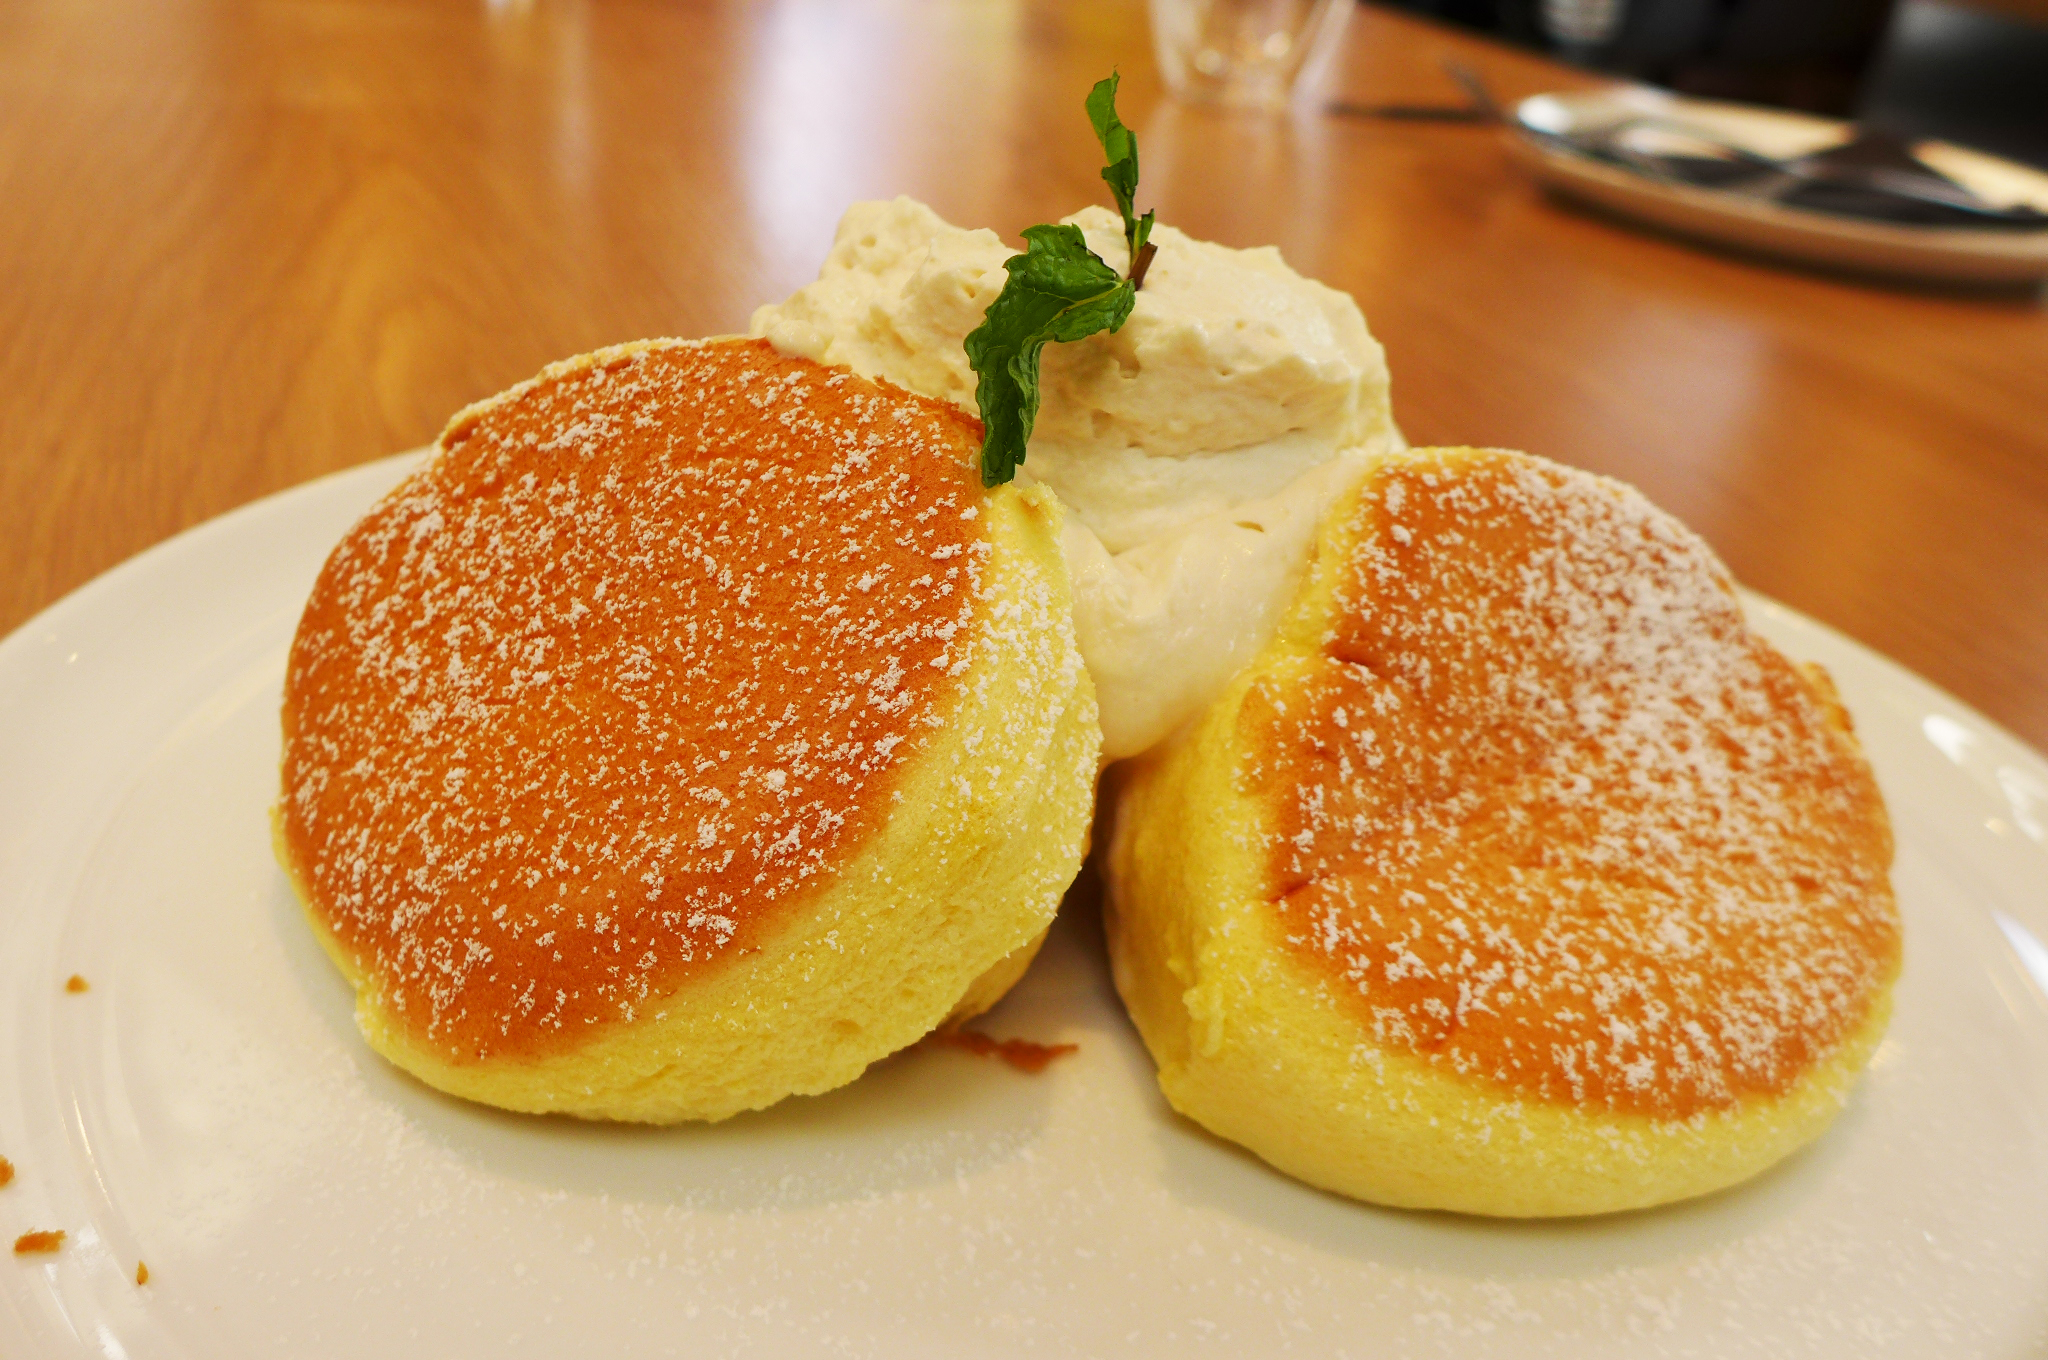 Two round puffy pancakes browned on top with a cloud of whipped cream behind them and a sprig of fresh mint on top...